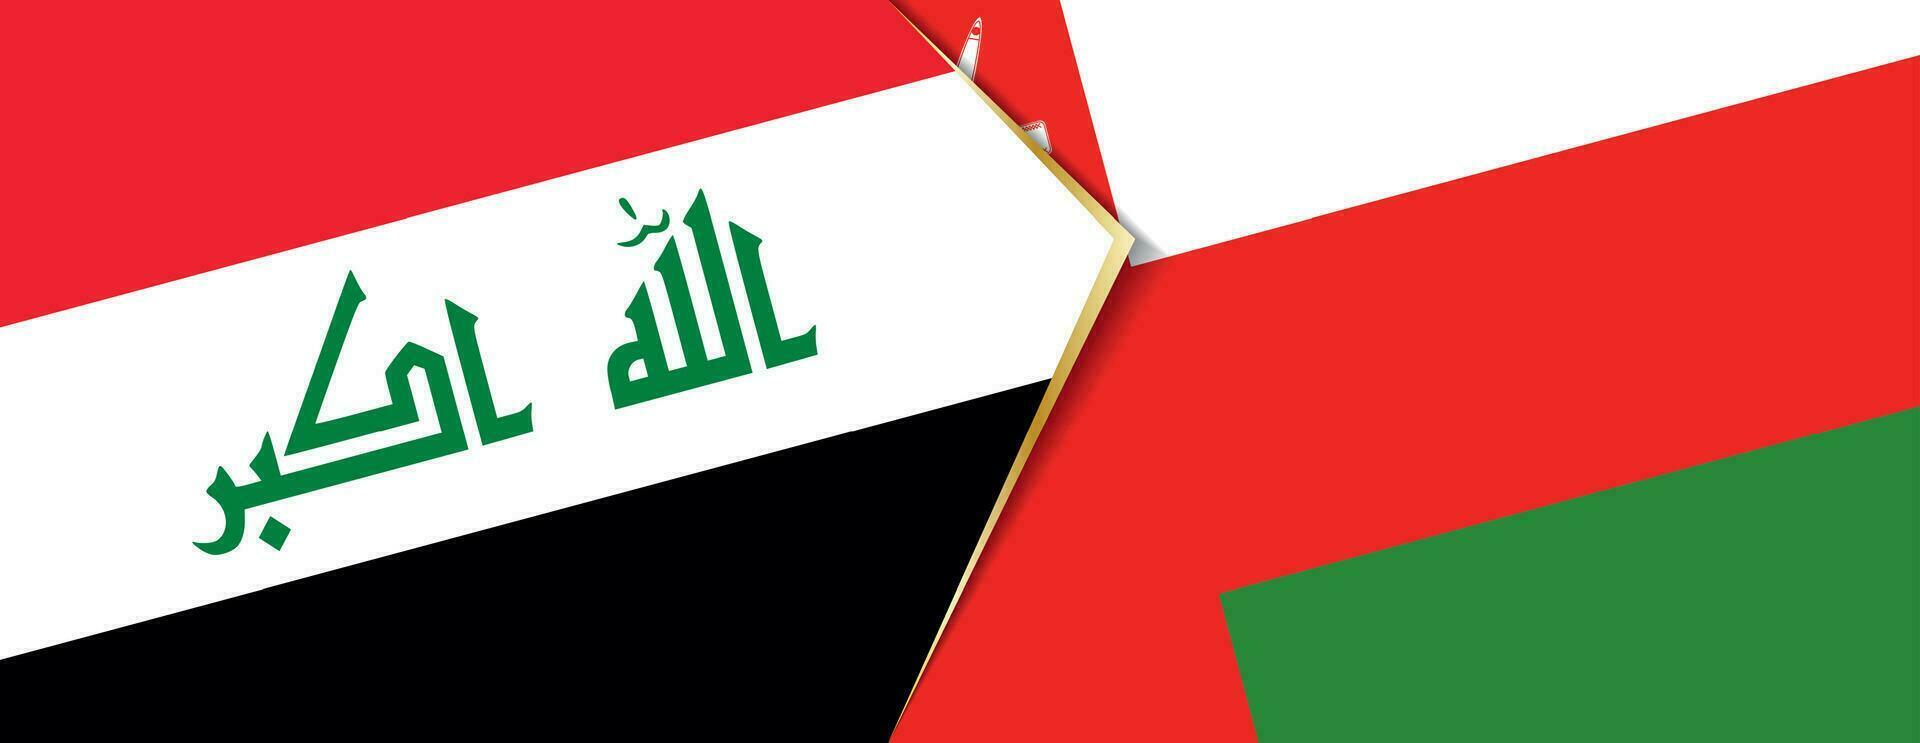 Iraq and Oman flags, two vector flags.